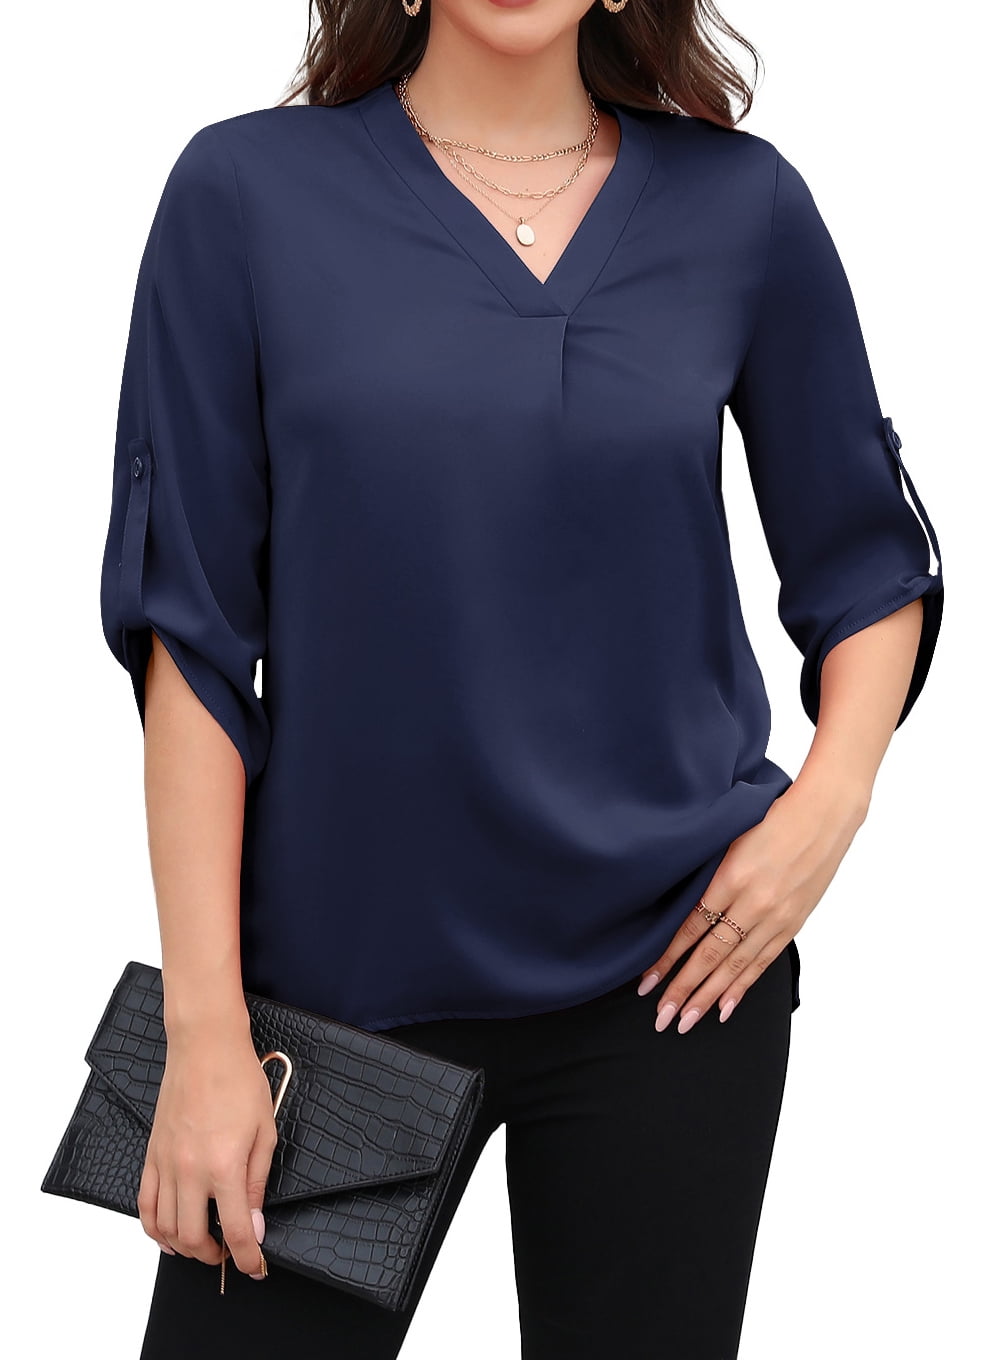 HOWCOME Womens Blouses 3/4 Roll up Sleeve, Henley V Neck Business ...